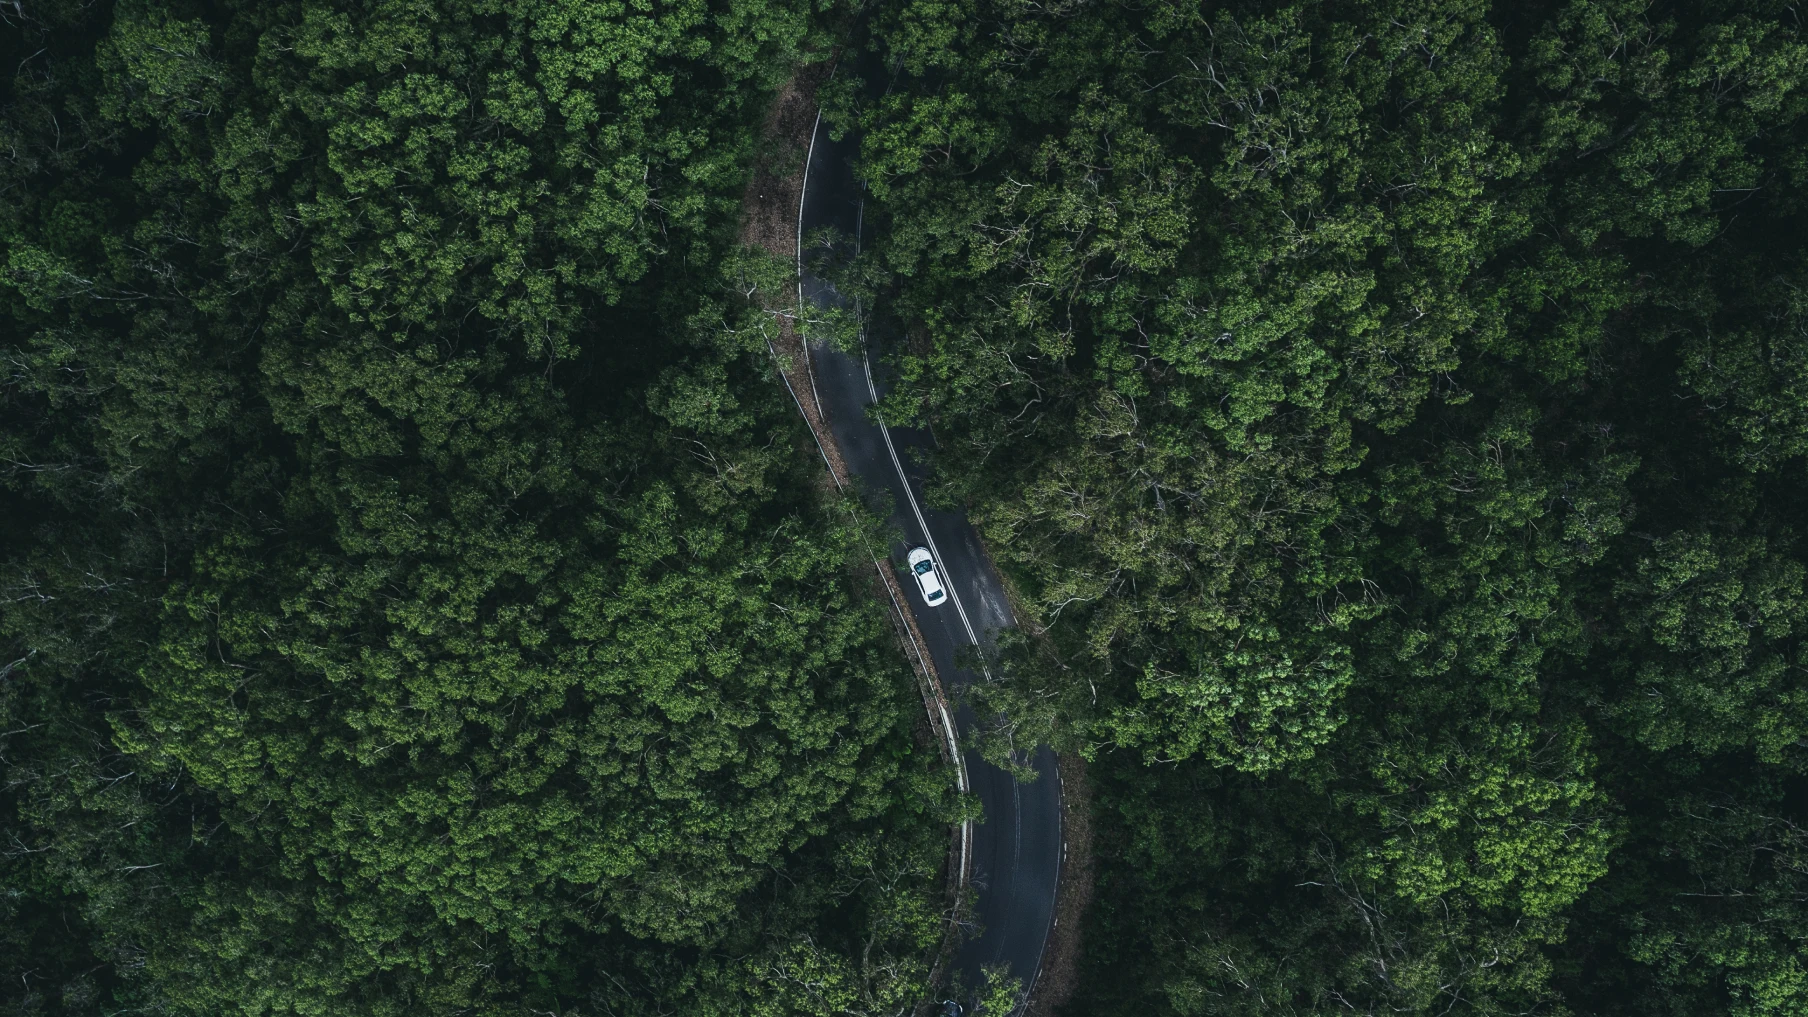 Aerial view of a white car on a highway in the middle of a lush forest